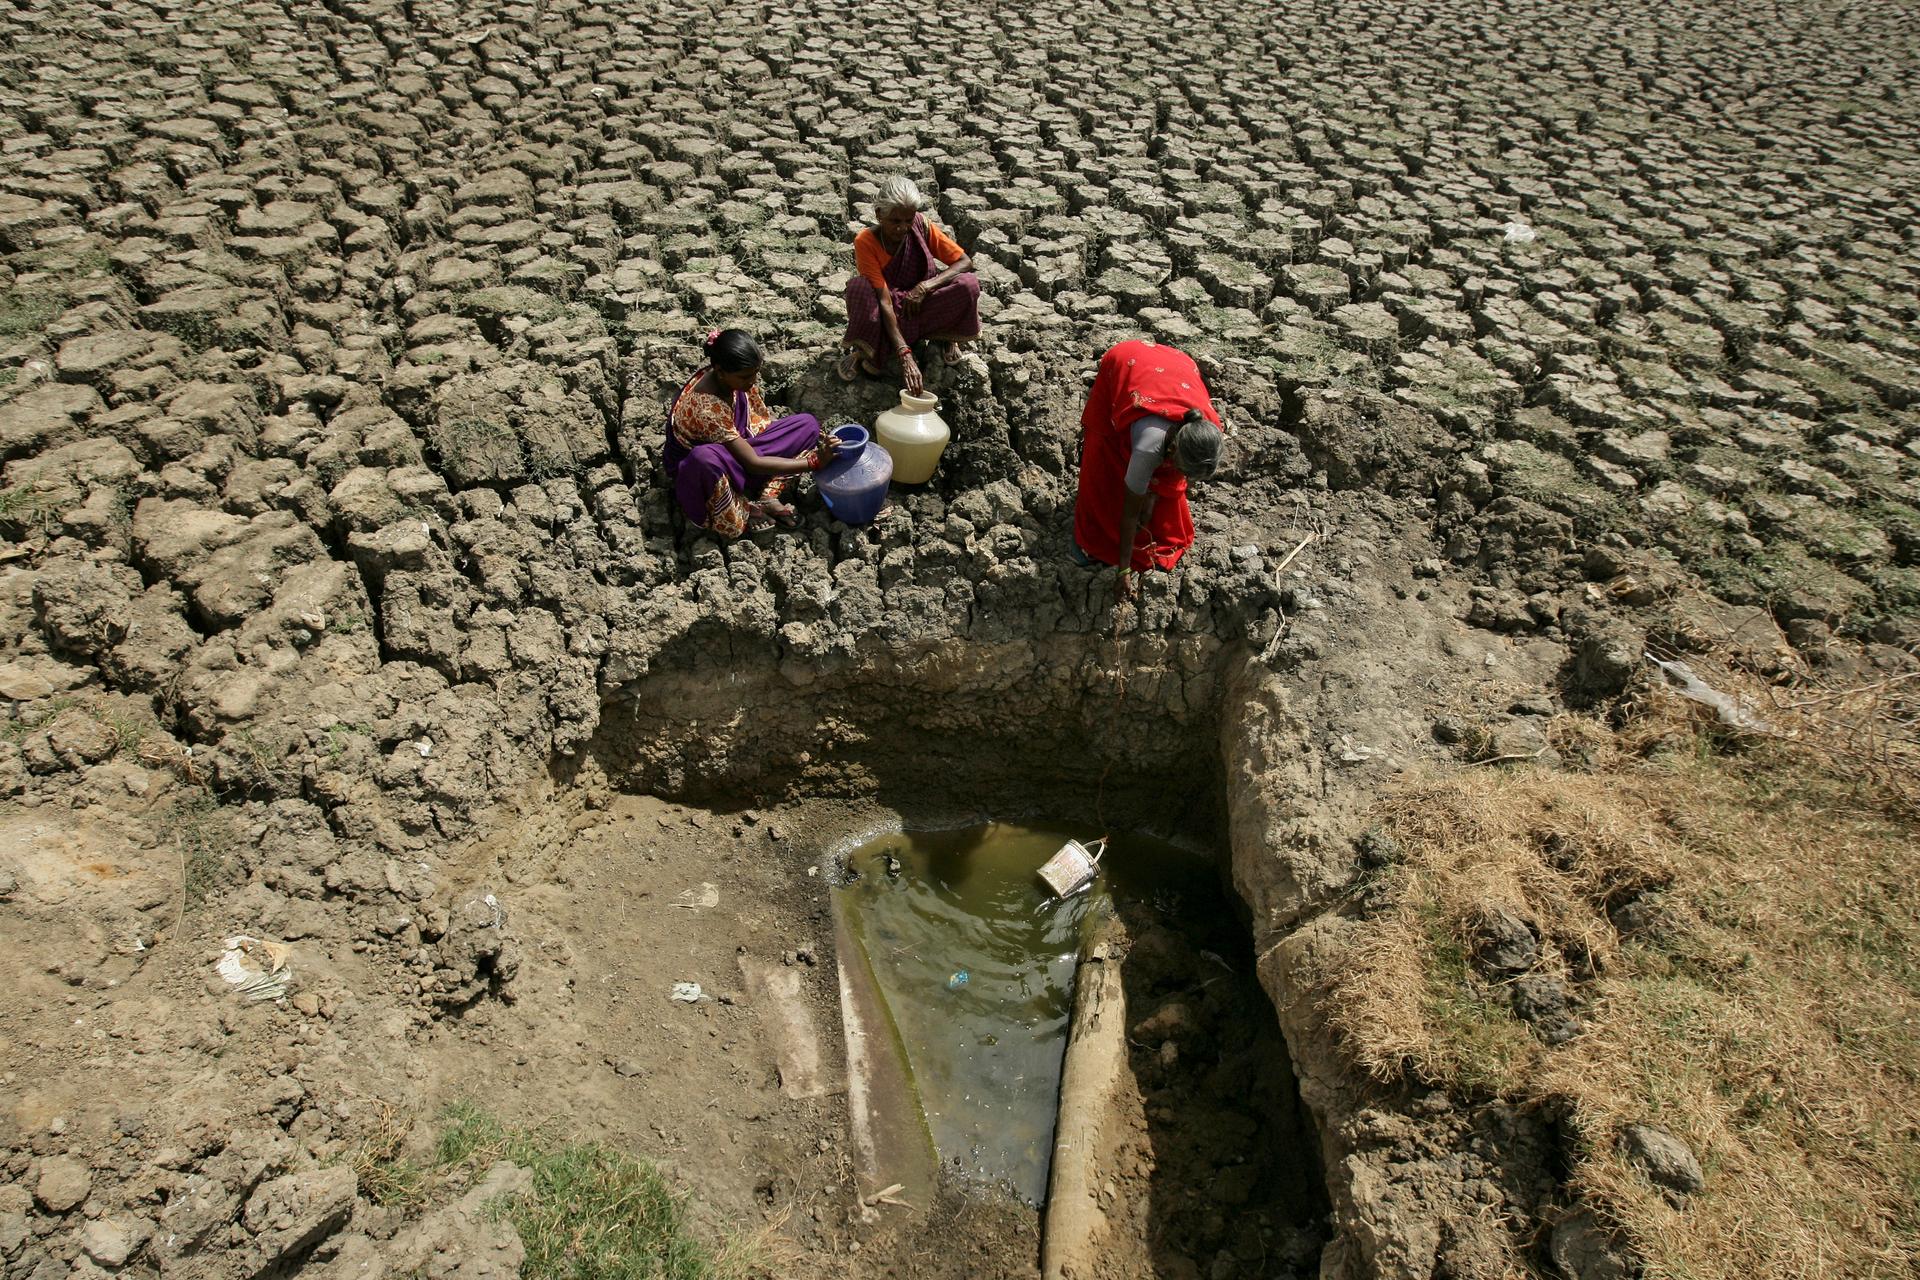 Women fetch water from an opening made by residents at a dried-up lake in Chennai, India, June 11, 2019.